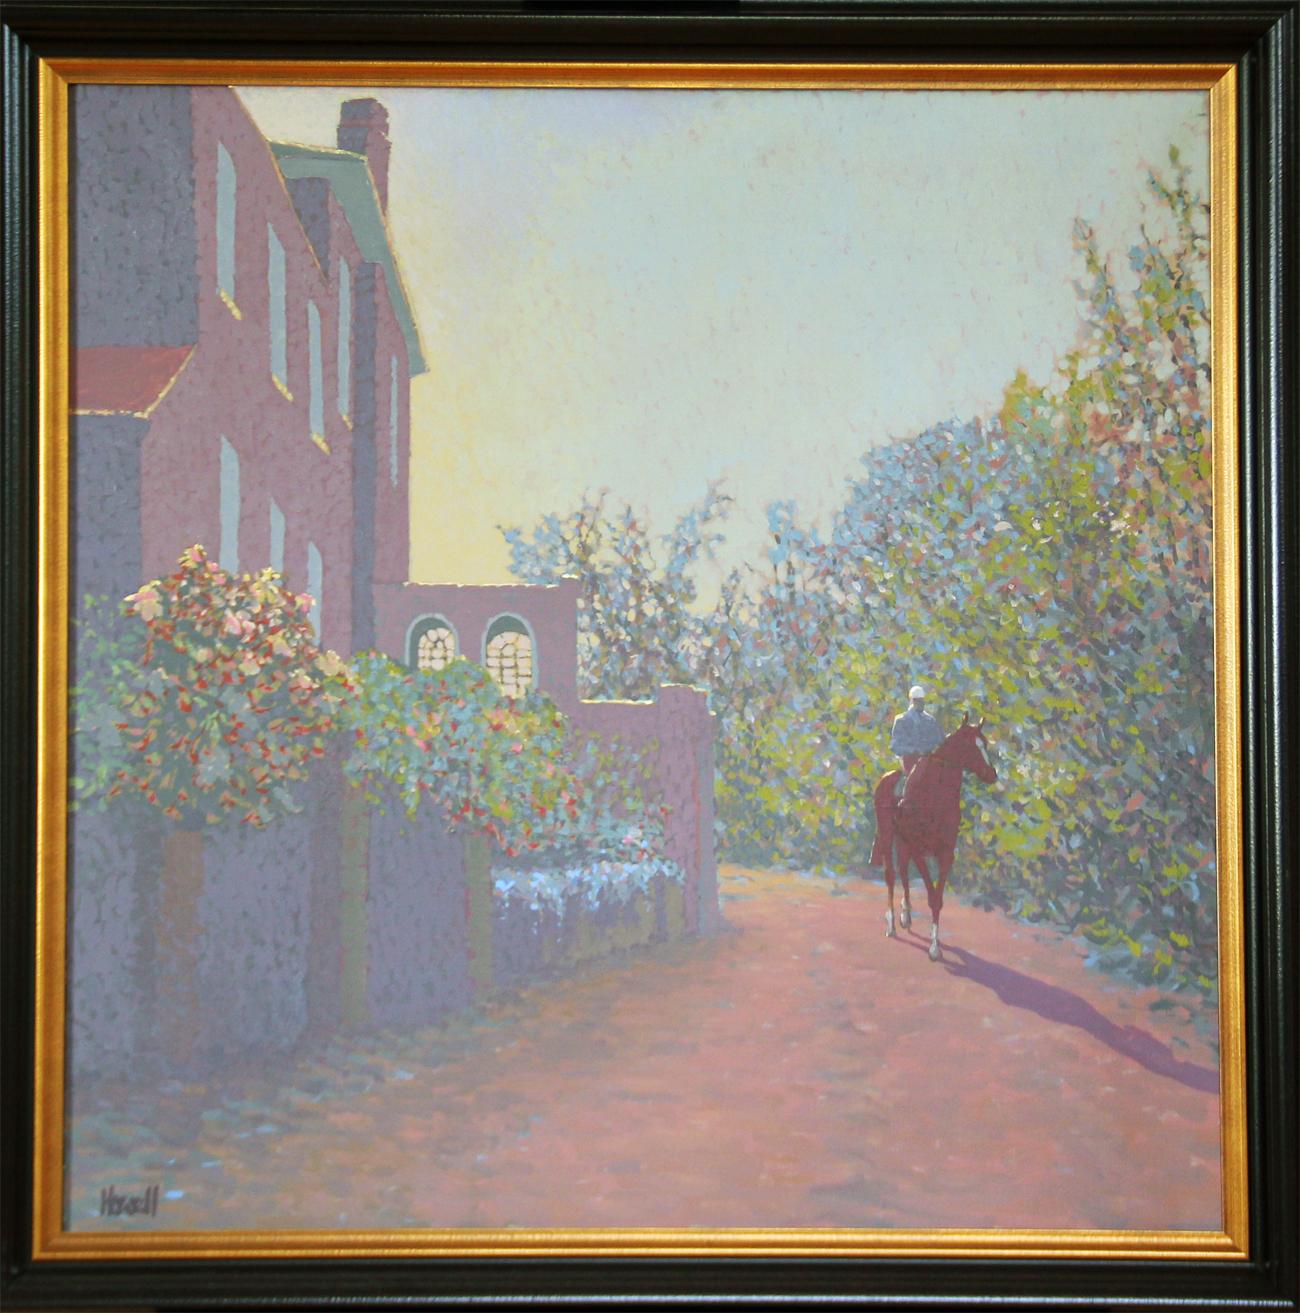 Peter howell Figurative Painting - Peter Howell, Single Horse Walking by House, Oil on Canvas 